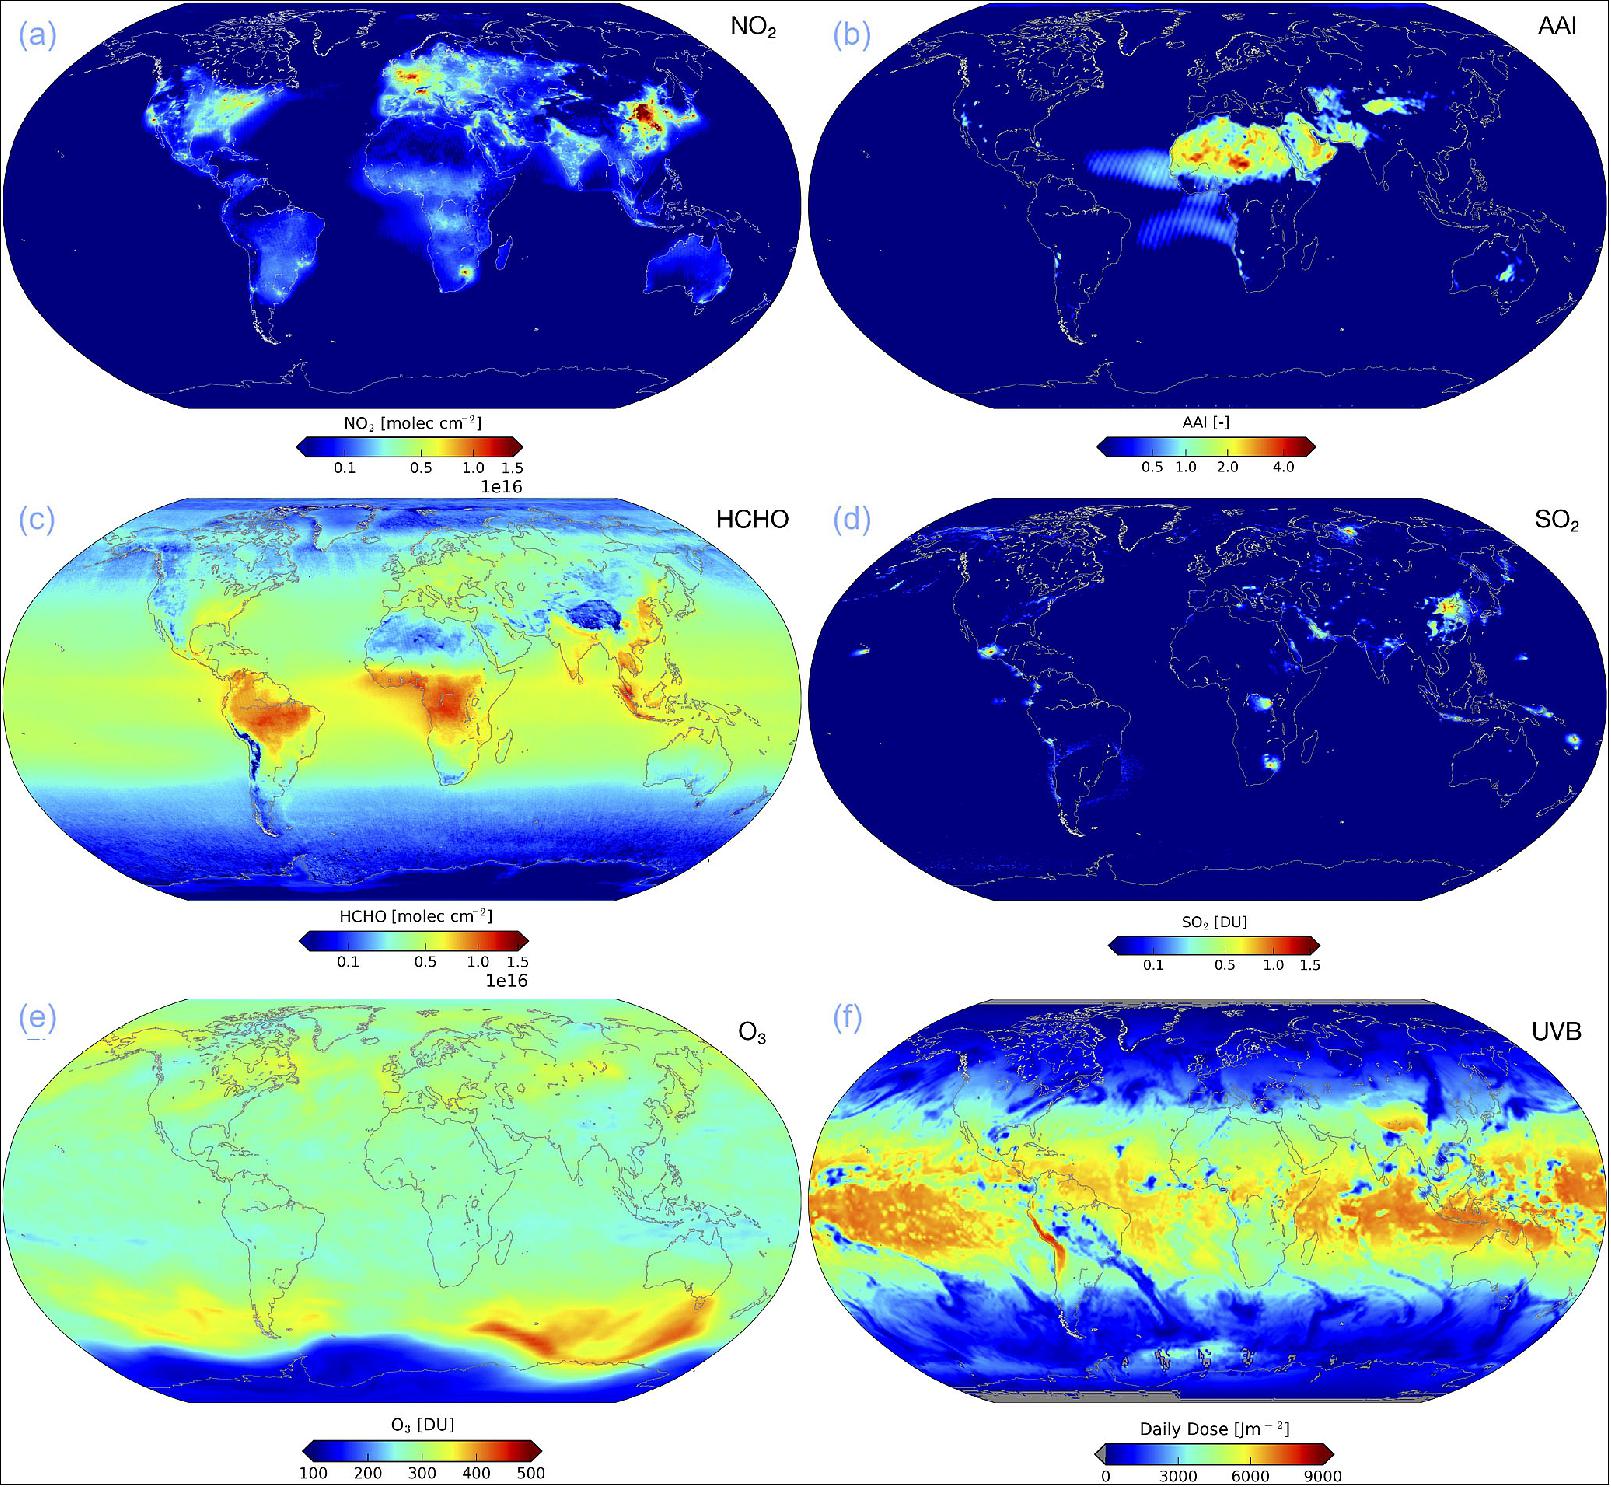 Figure 29: OMI mission averages (2004–2016) for NO2 (a), absorbing aerosol index (AAI; b), HCHO (c), and SO2 (d). Total ozone column (O3; e) and surface UVB amount (f) are shown for 24 September 2006, the day with a record size ozone hole (image credit: OMI study team, Ref. 28)